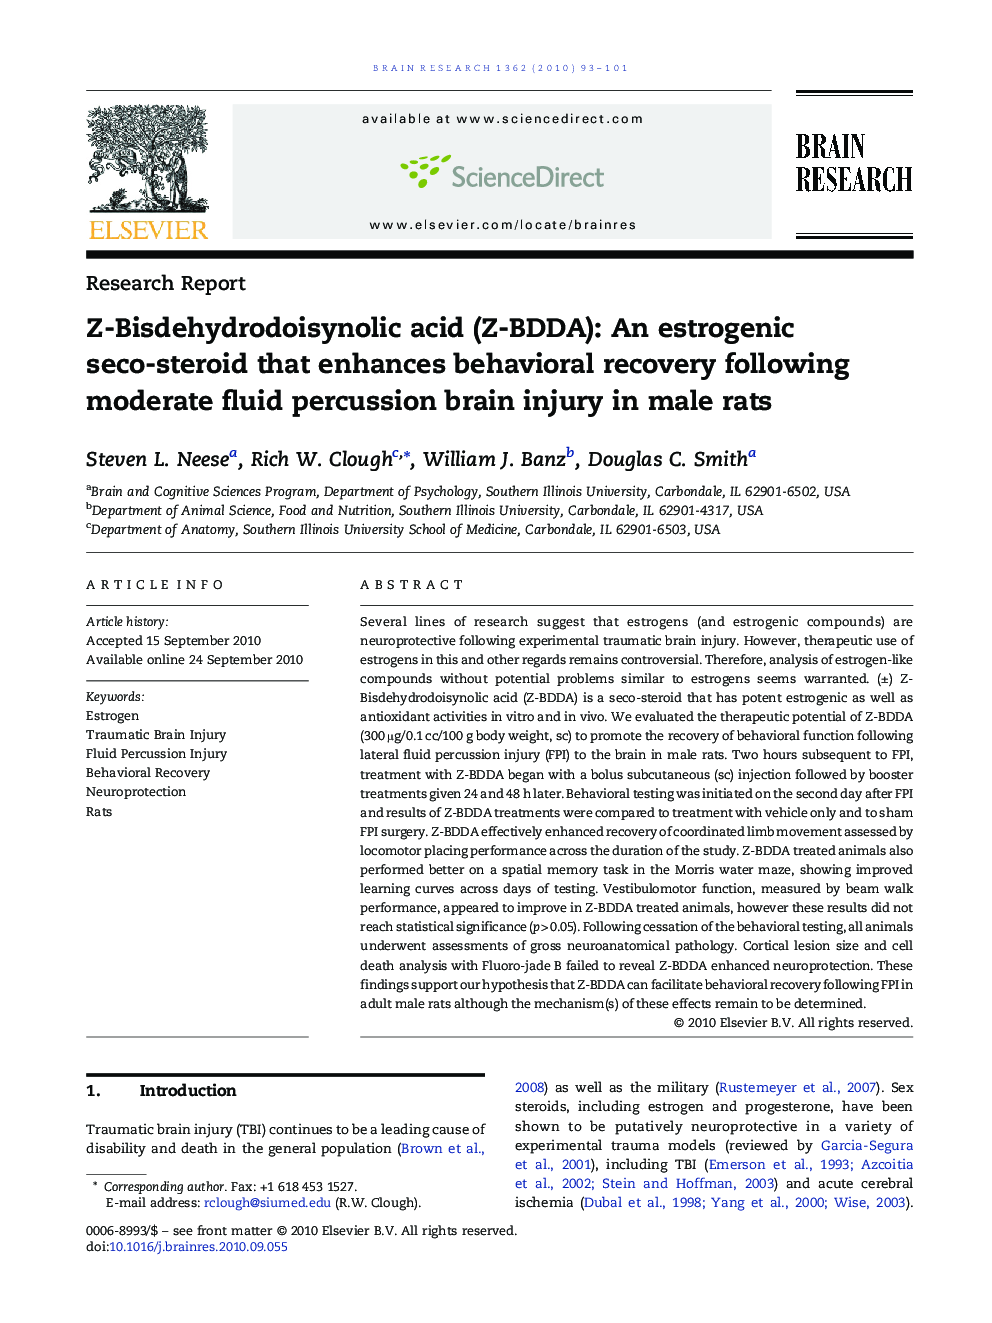 Z-Bisdehydrodoisynolic acid (Z-BDDA): An estrogenic seco-steroid that enhances behavioral recovery following moderate fluid percussion brain injury in male rats